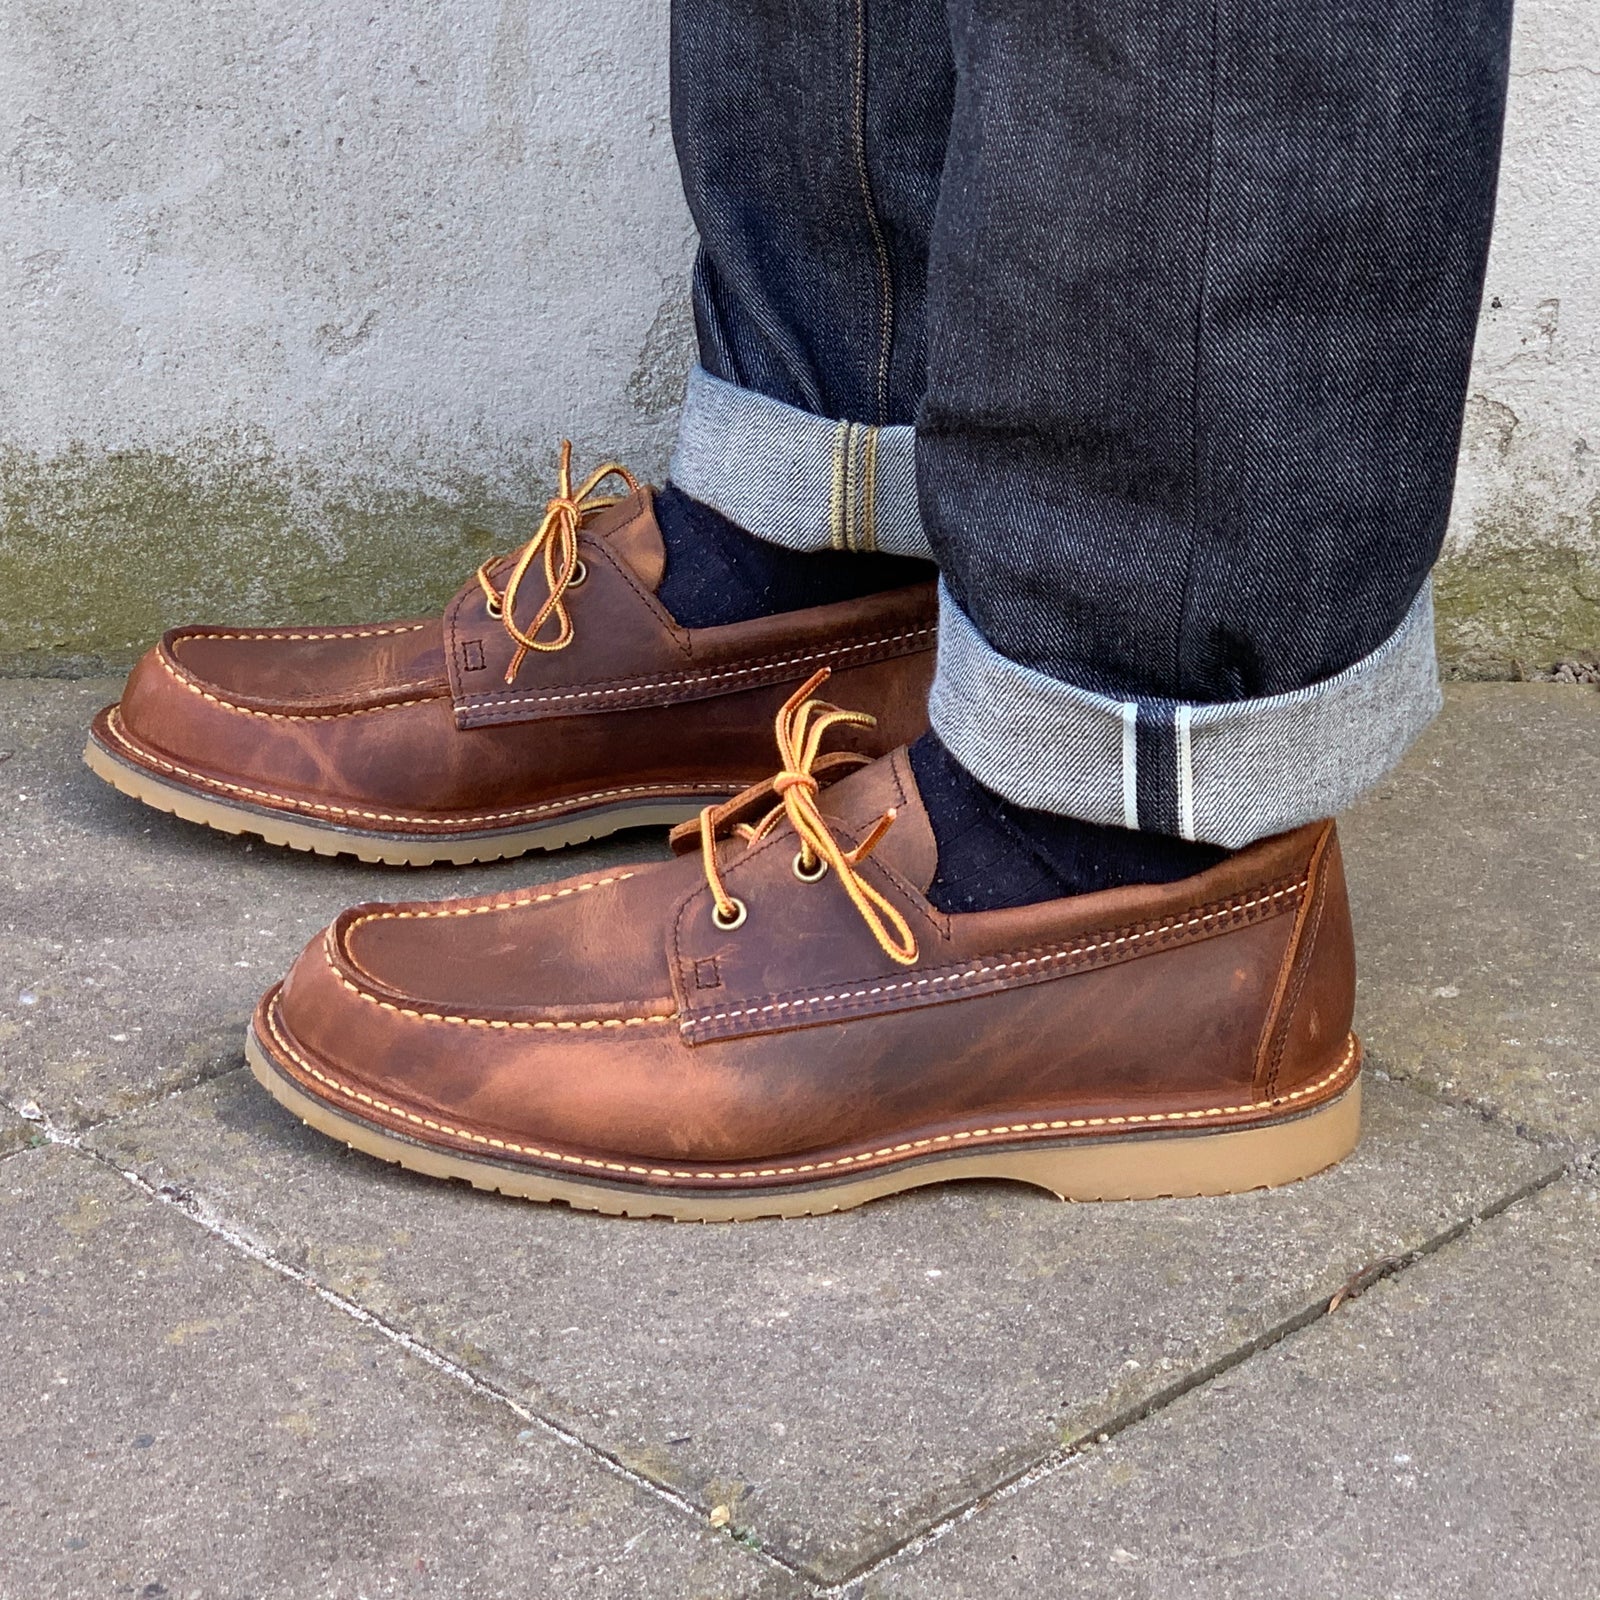 Red Wing Boots Online - Free shipping within Europe - Brund